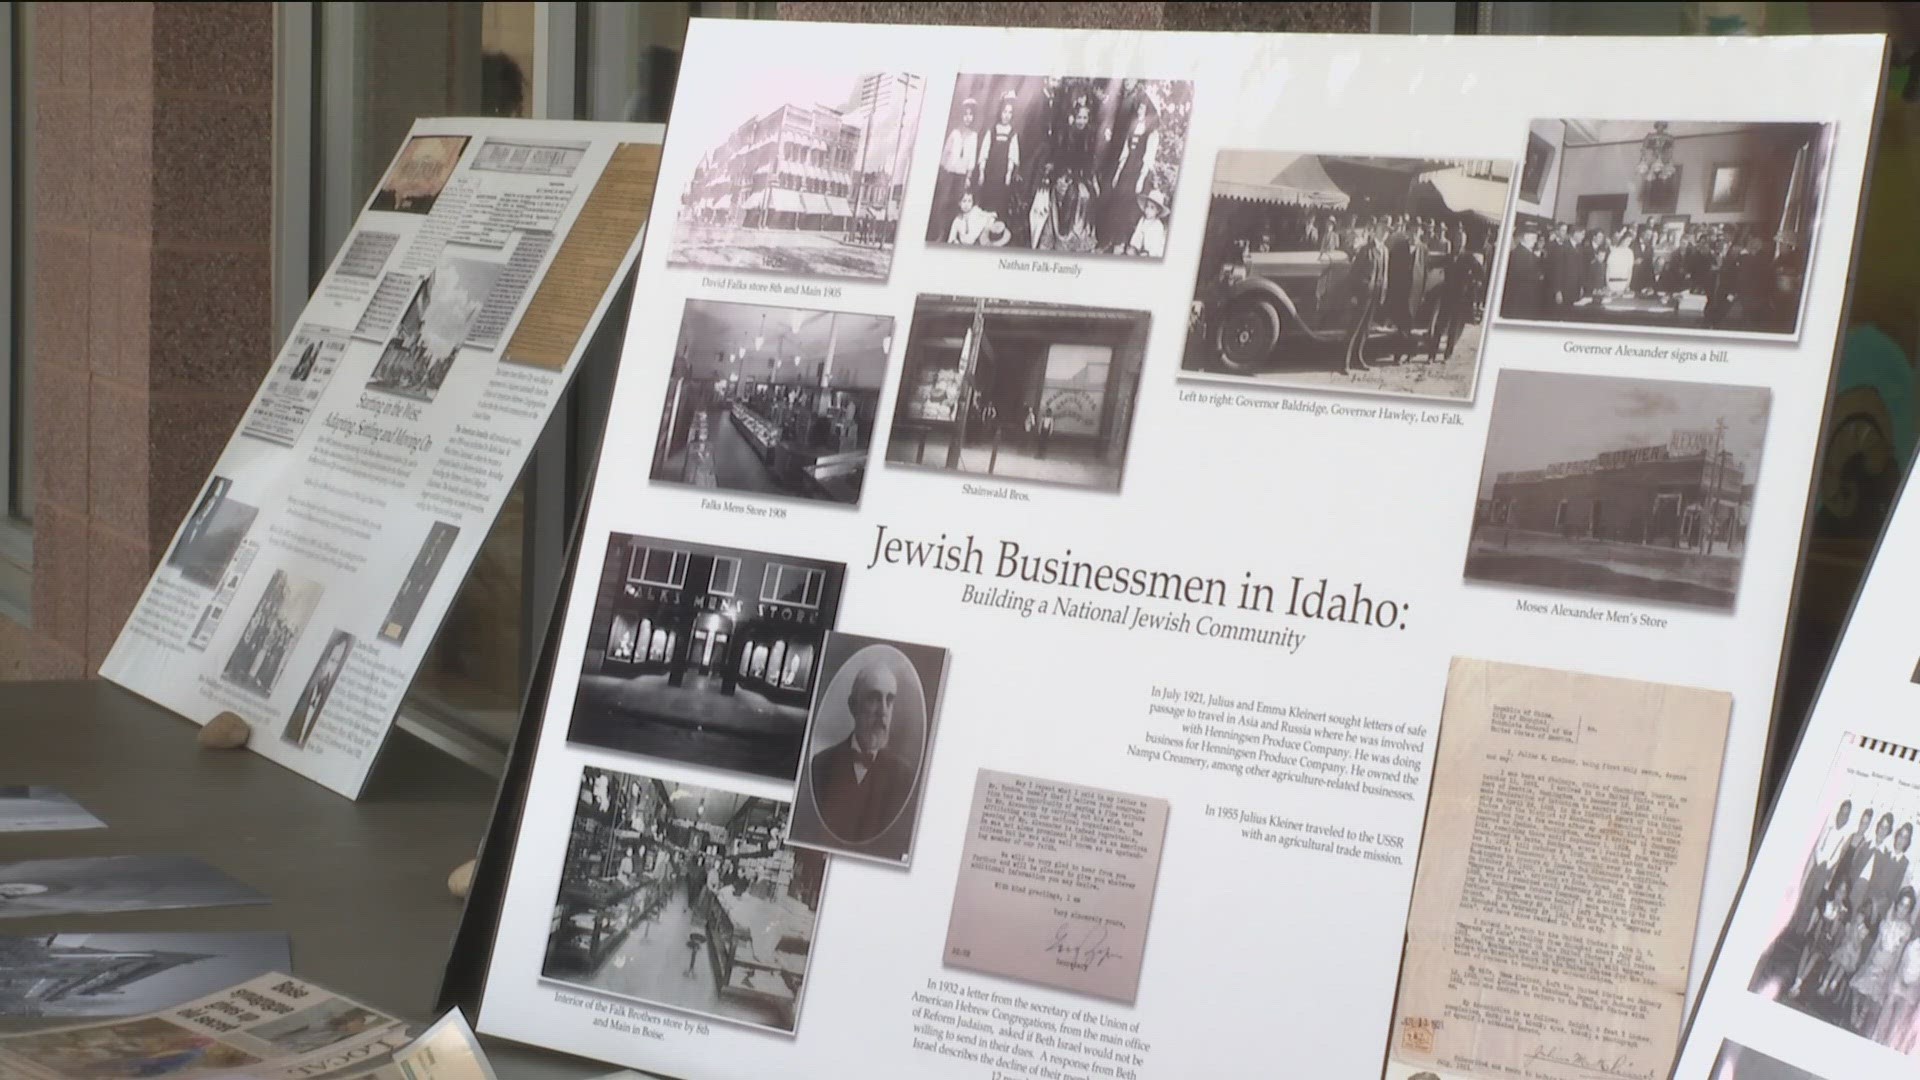 Boise's Jewish community took time to celebrate its history.